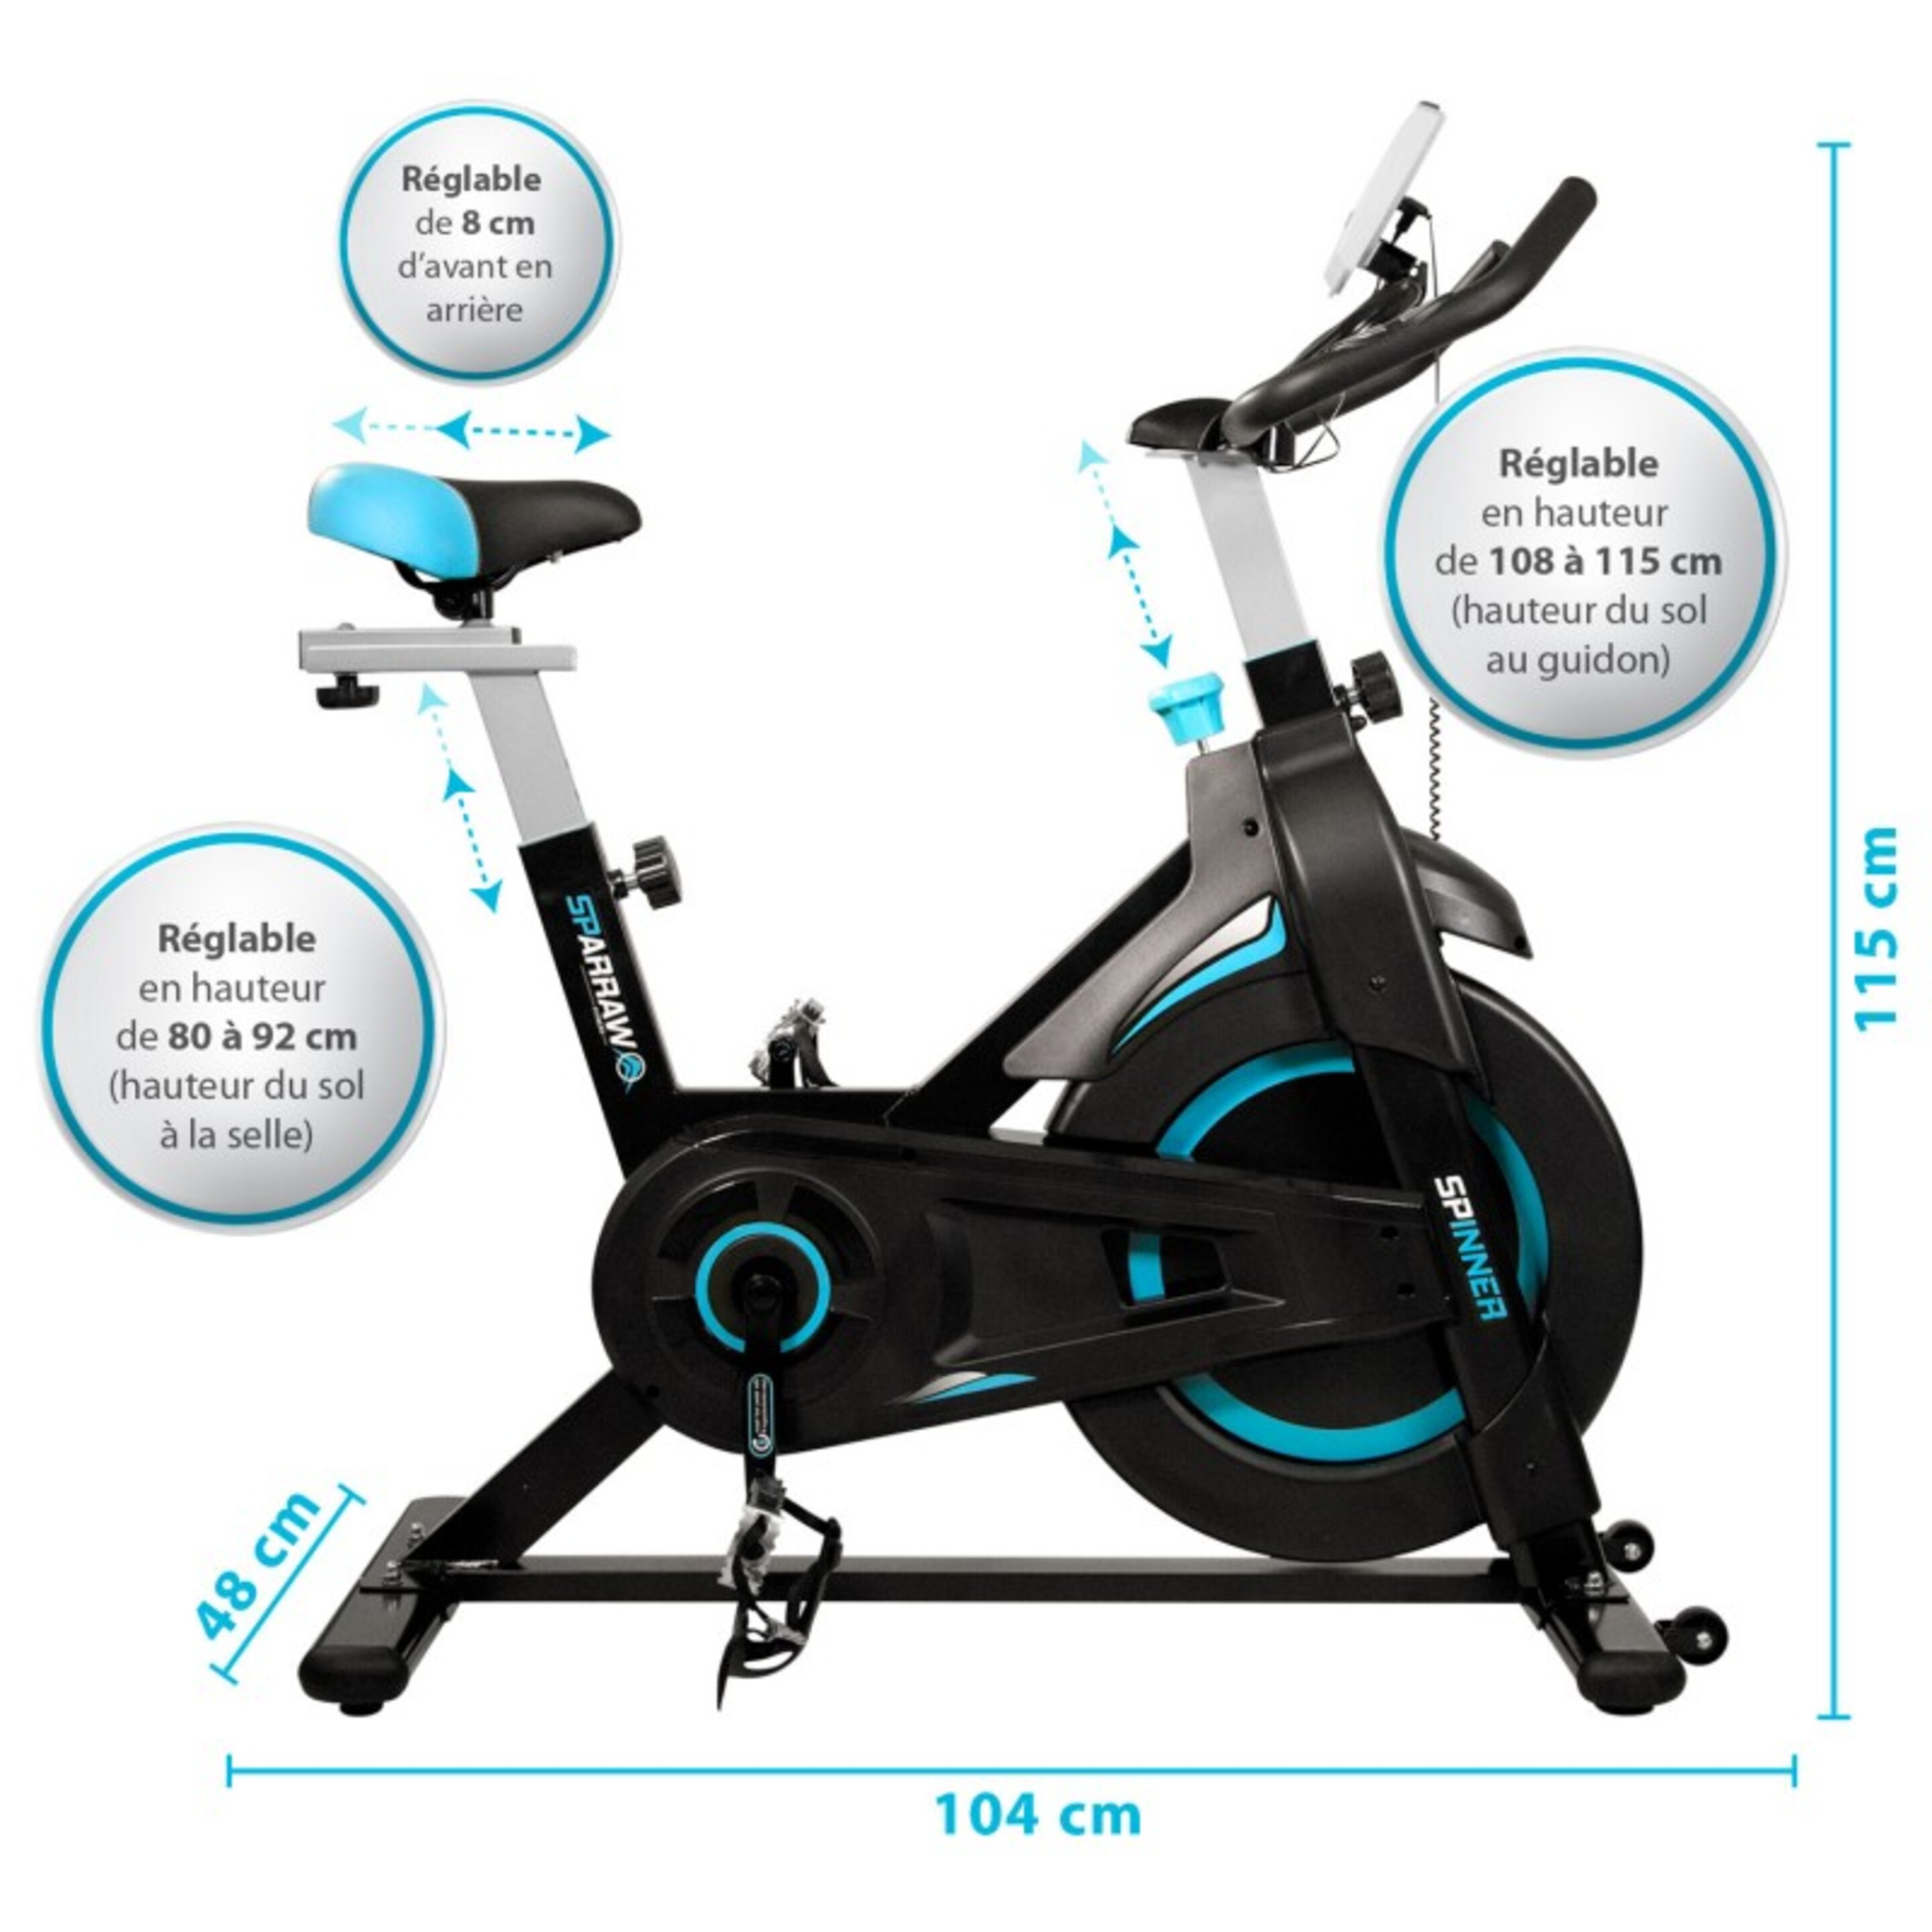 Bicicleta Spinning Sparraw Fitness Spinner Con Rueda Inercia 6kg